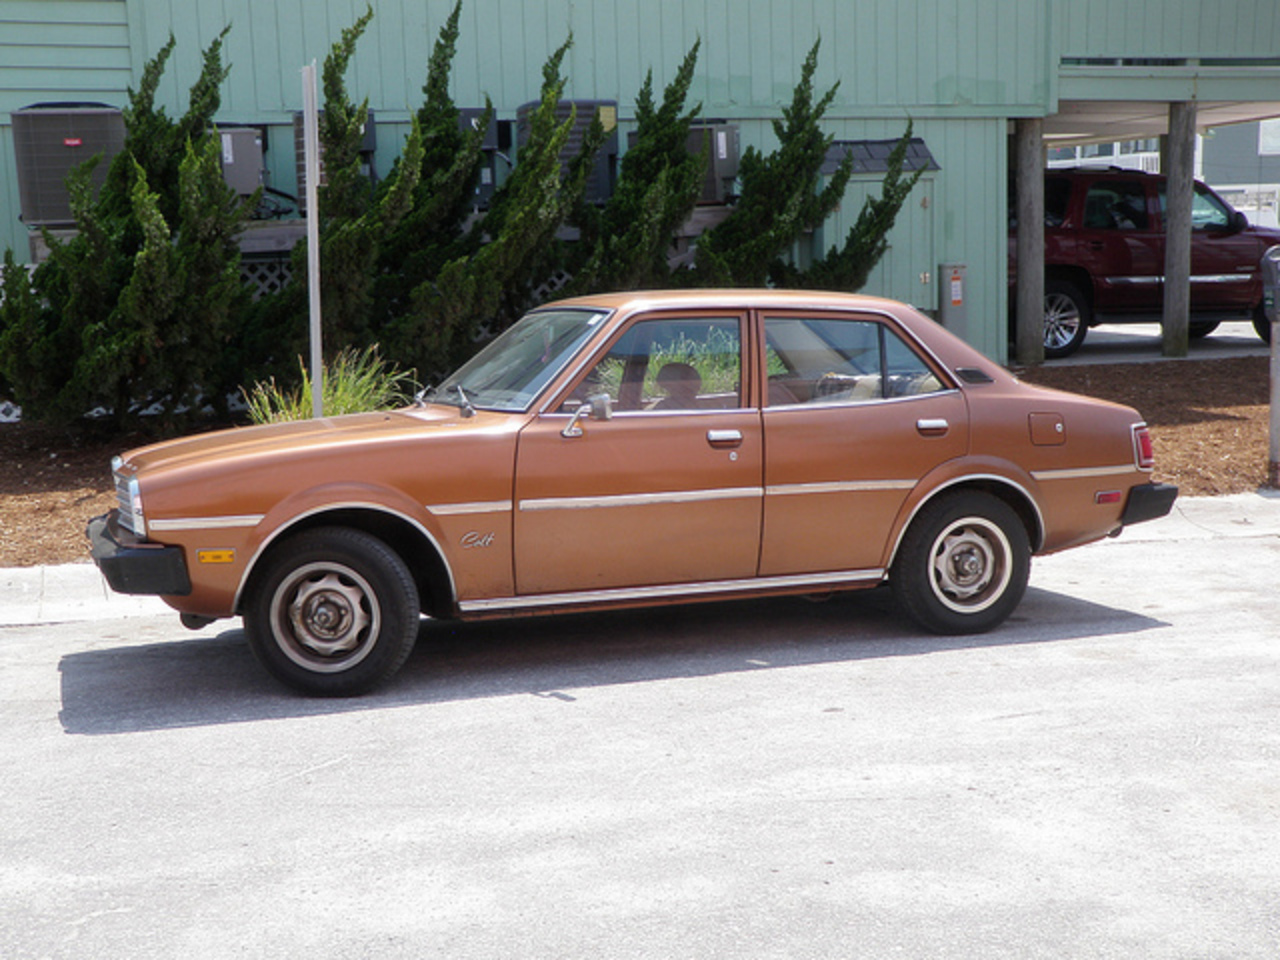 1978 Plymouth Colt | Flickr - Photo Sharing!